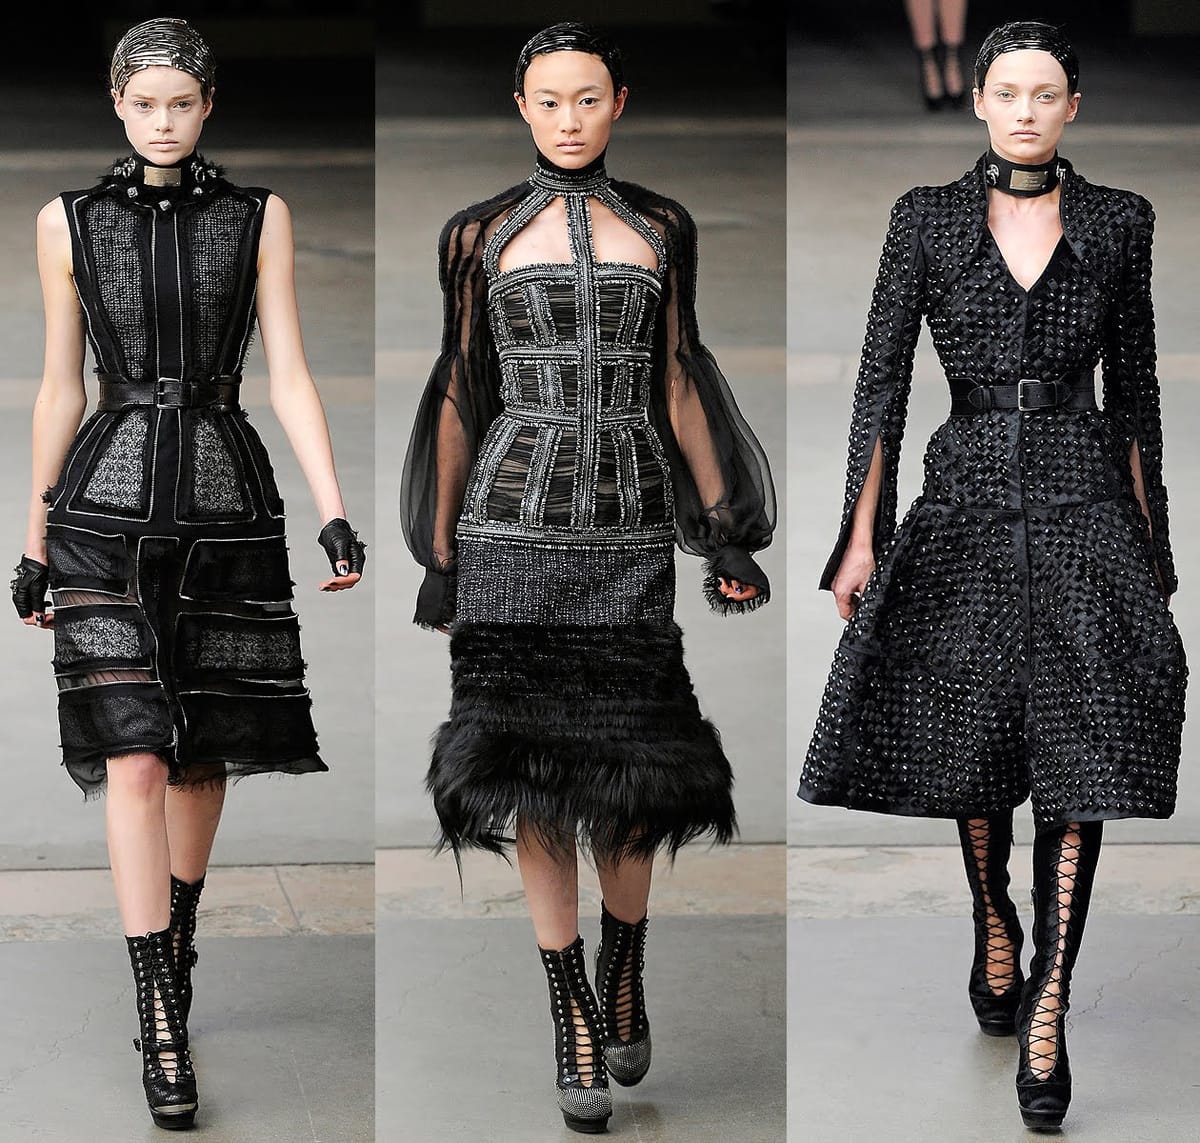 Lace and Leather: Fashion Articles for Bad-Ass Women